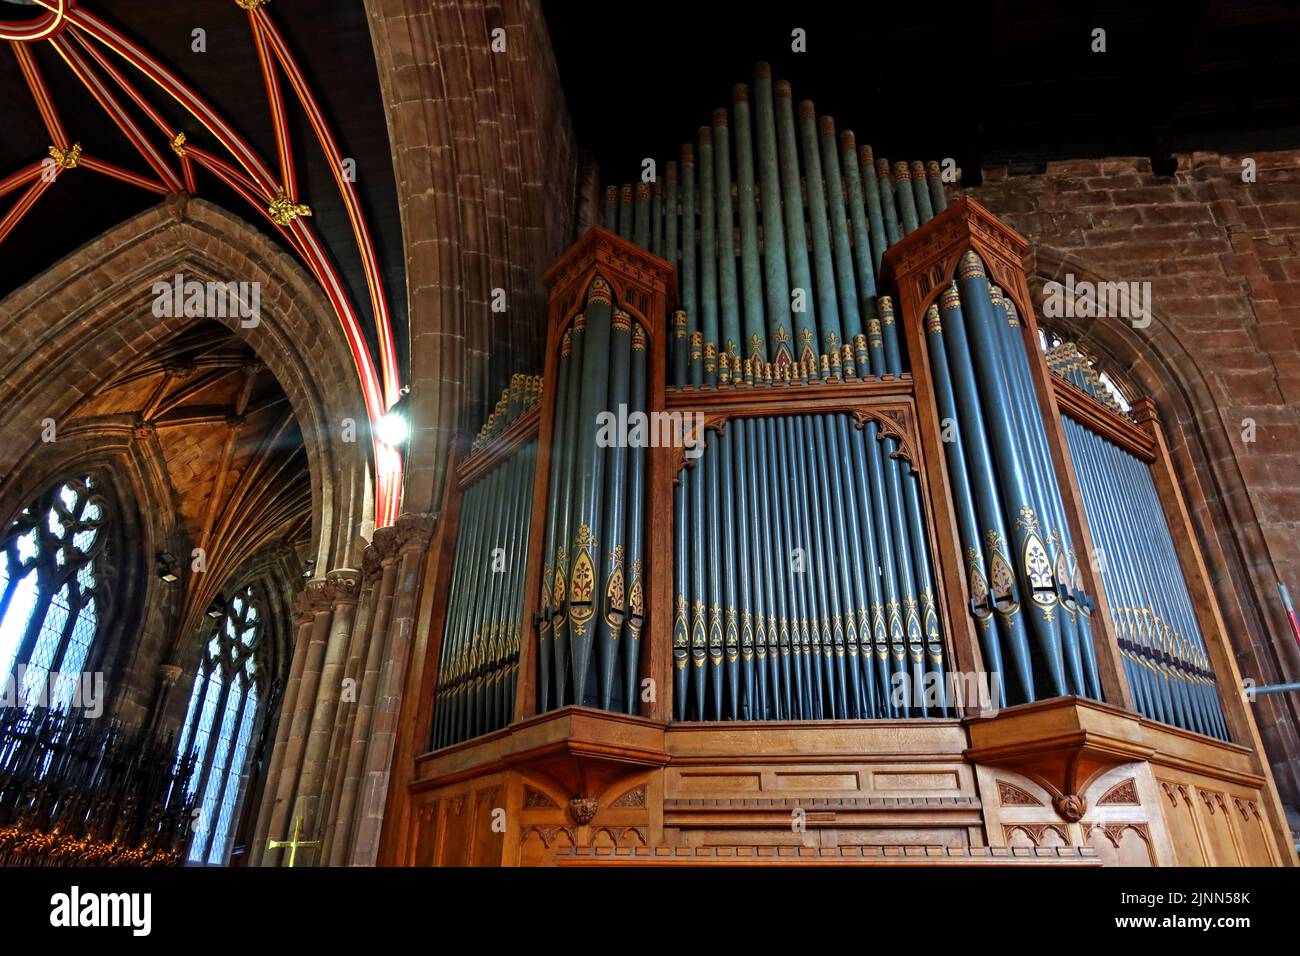 Victorian Forster and Andrews organ in St Mary's Church, Church Lane, Nantwich, Cheshire, England, UK,  CW5 5RQ Stock Photo